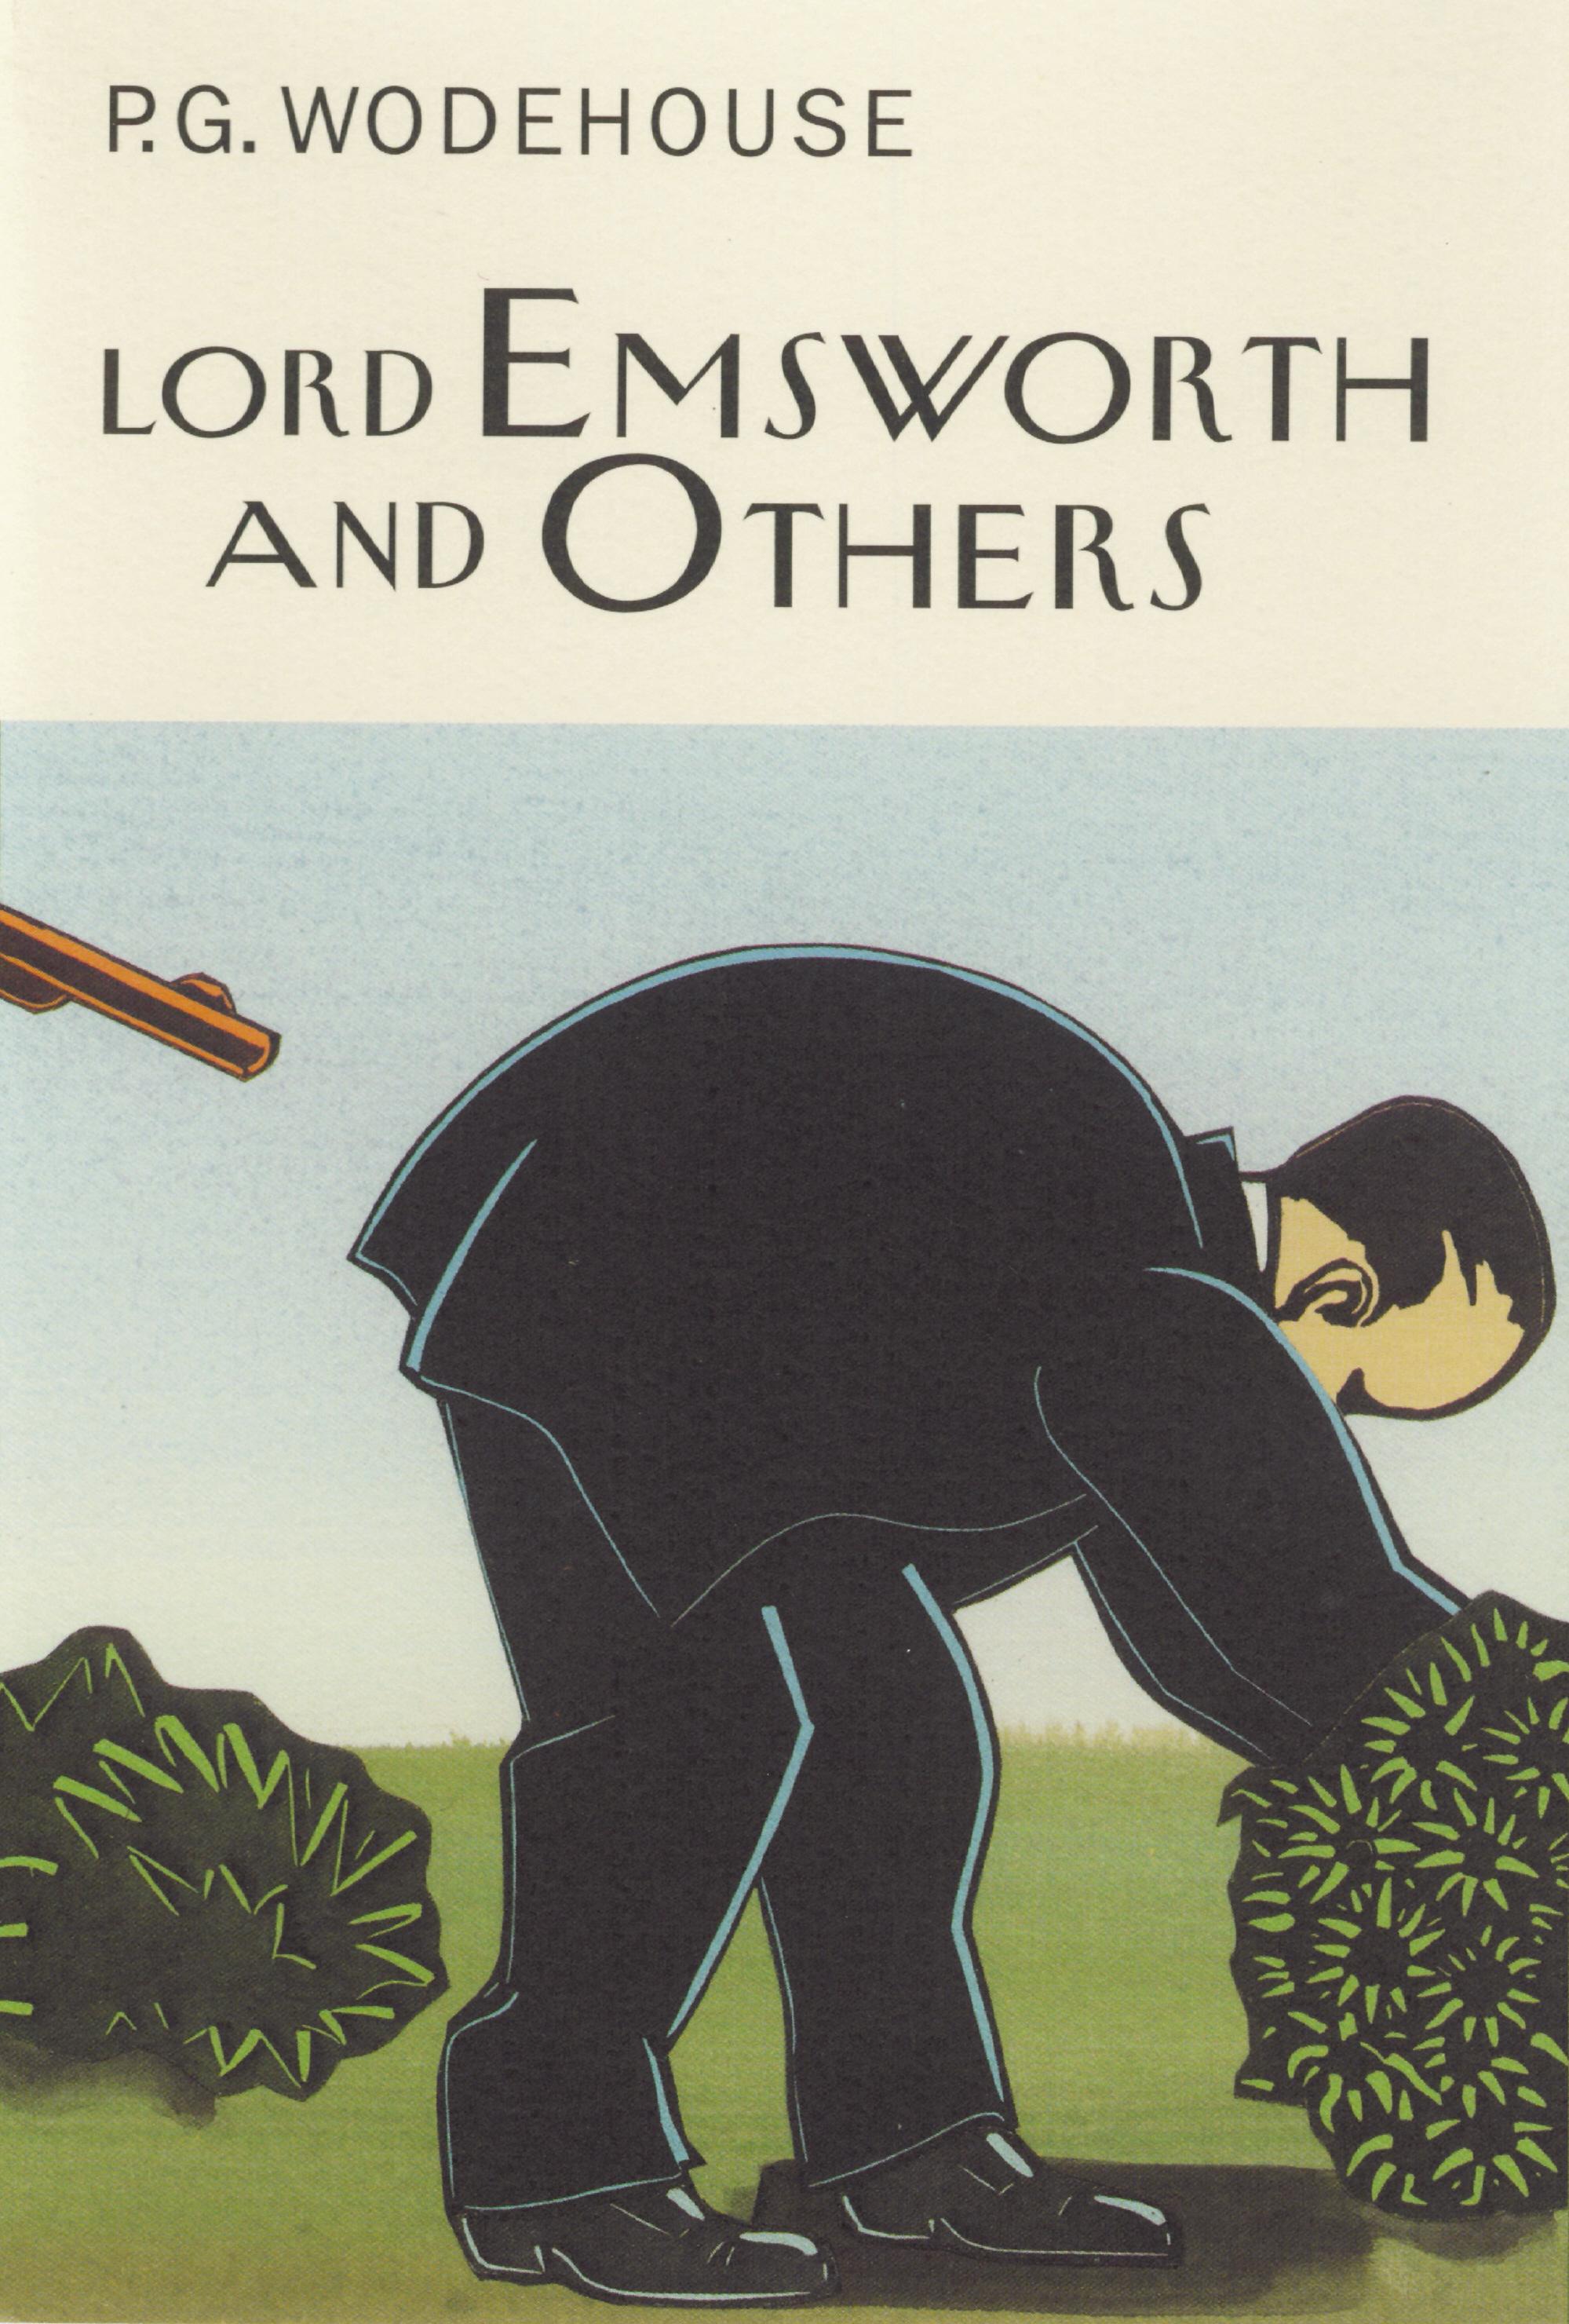 Lord Emsworth And Others - P.G. Wodehouse